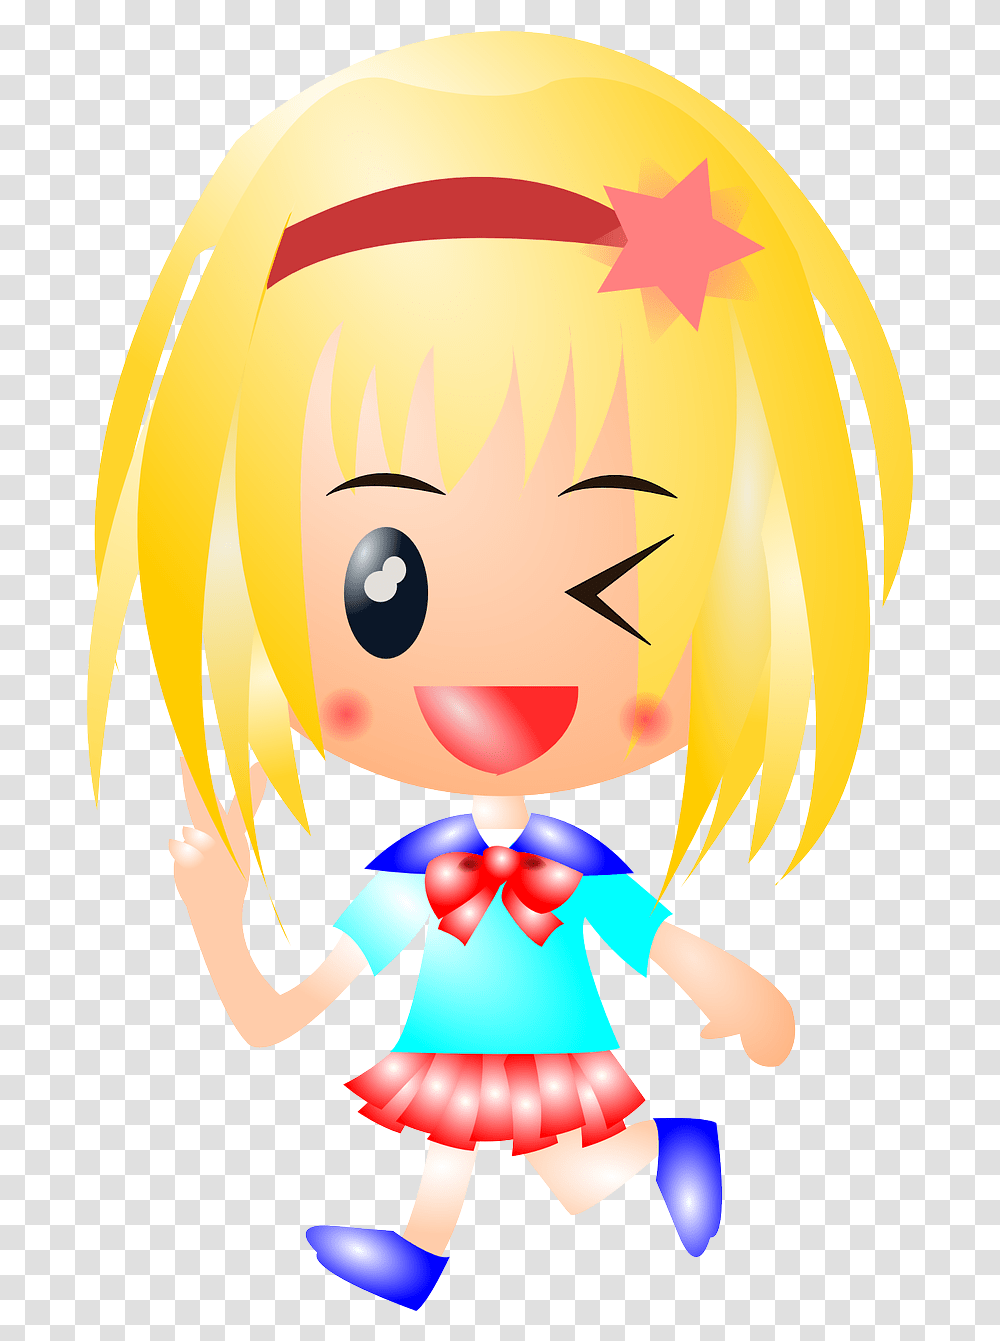 Girl Anime Blonde Free Vector Graphic On Pixabay Fools Cartoon Image, Doll, Toy, Comics, Book Transparent Png